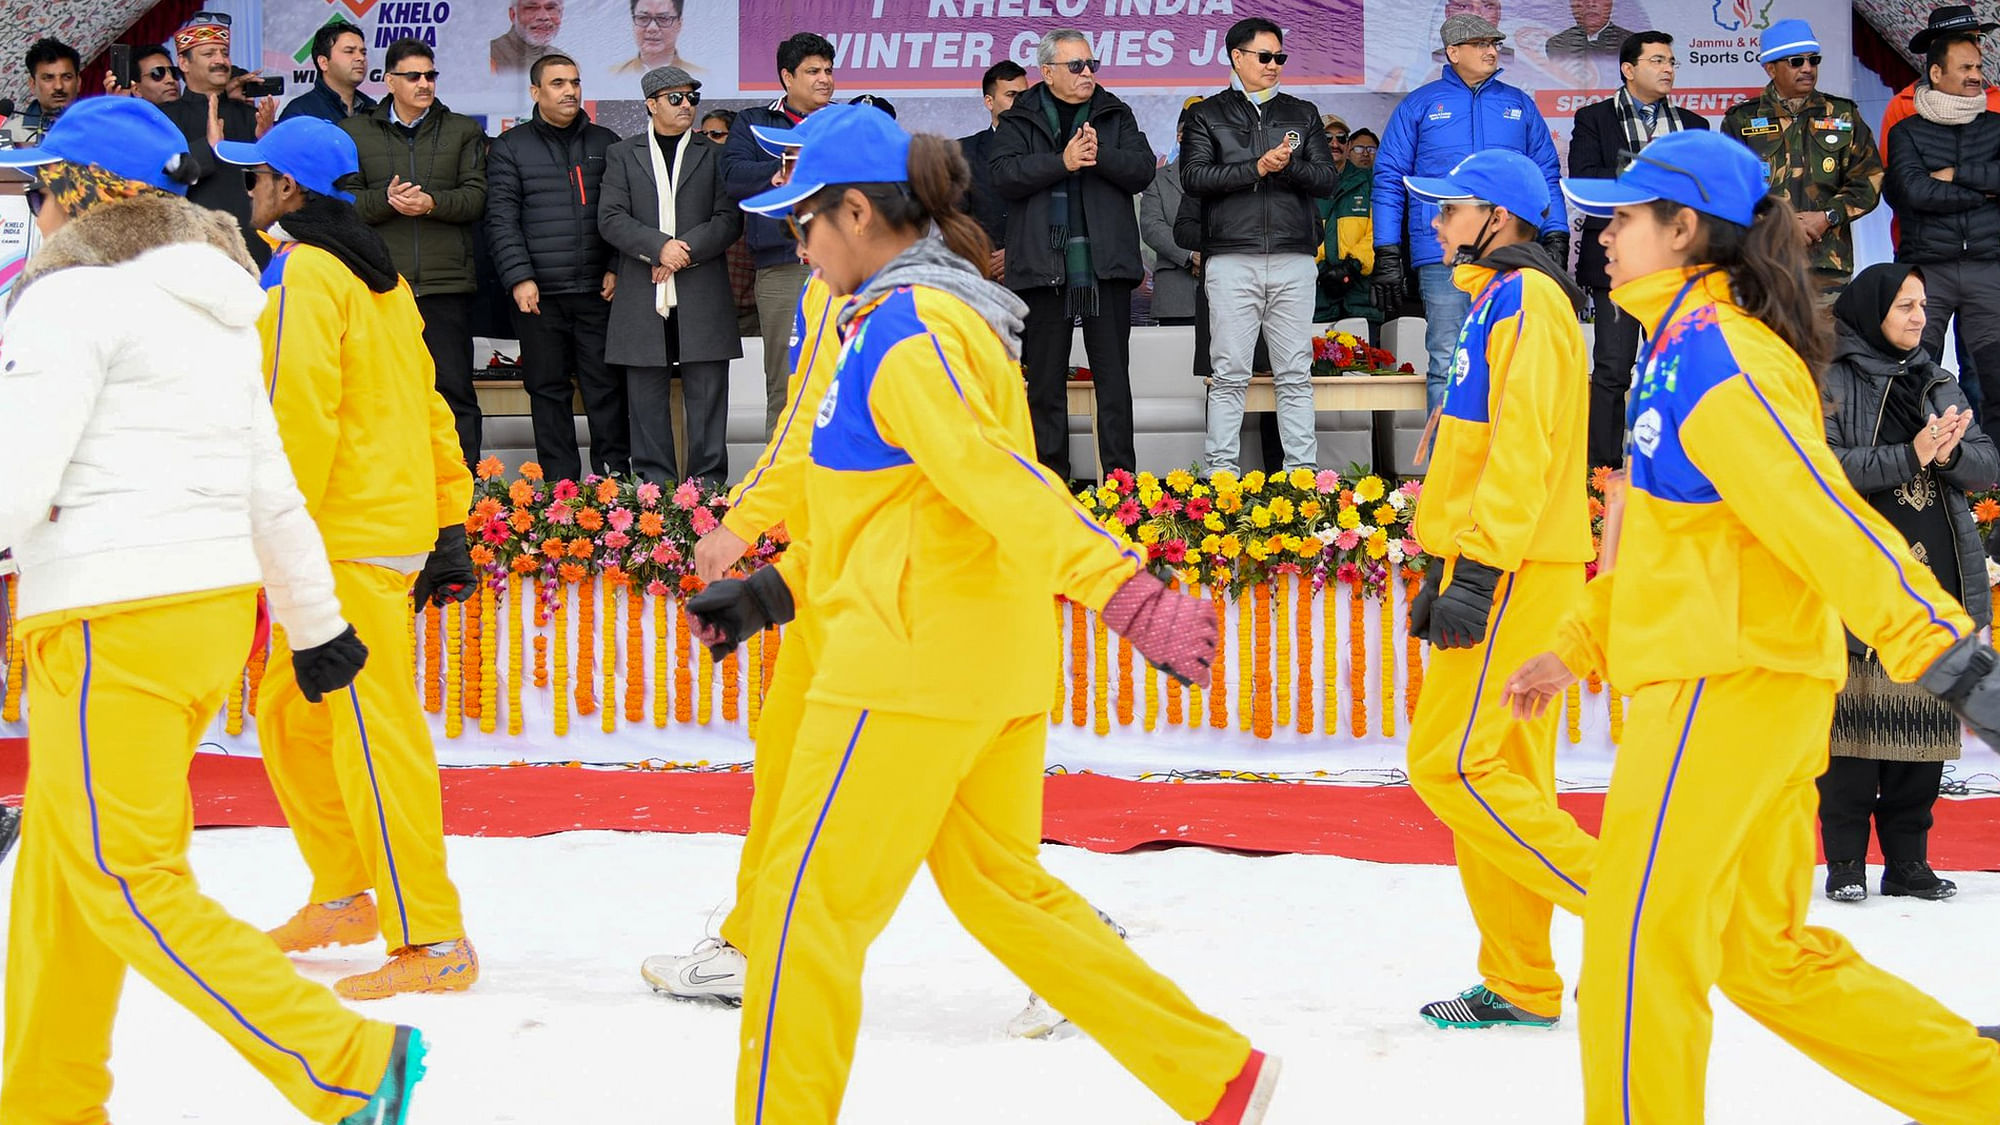 Sports Minister Kiren Rijiju inaugurated the first ever Khelo India Winter Games At Kashmir’s Gulmarg